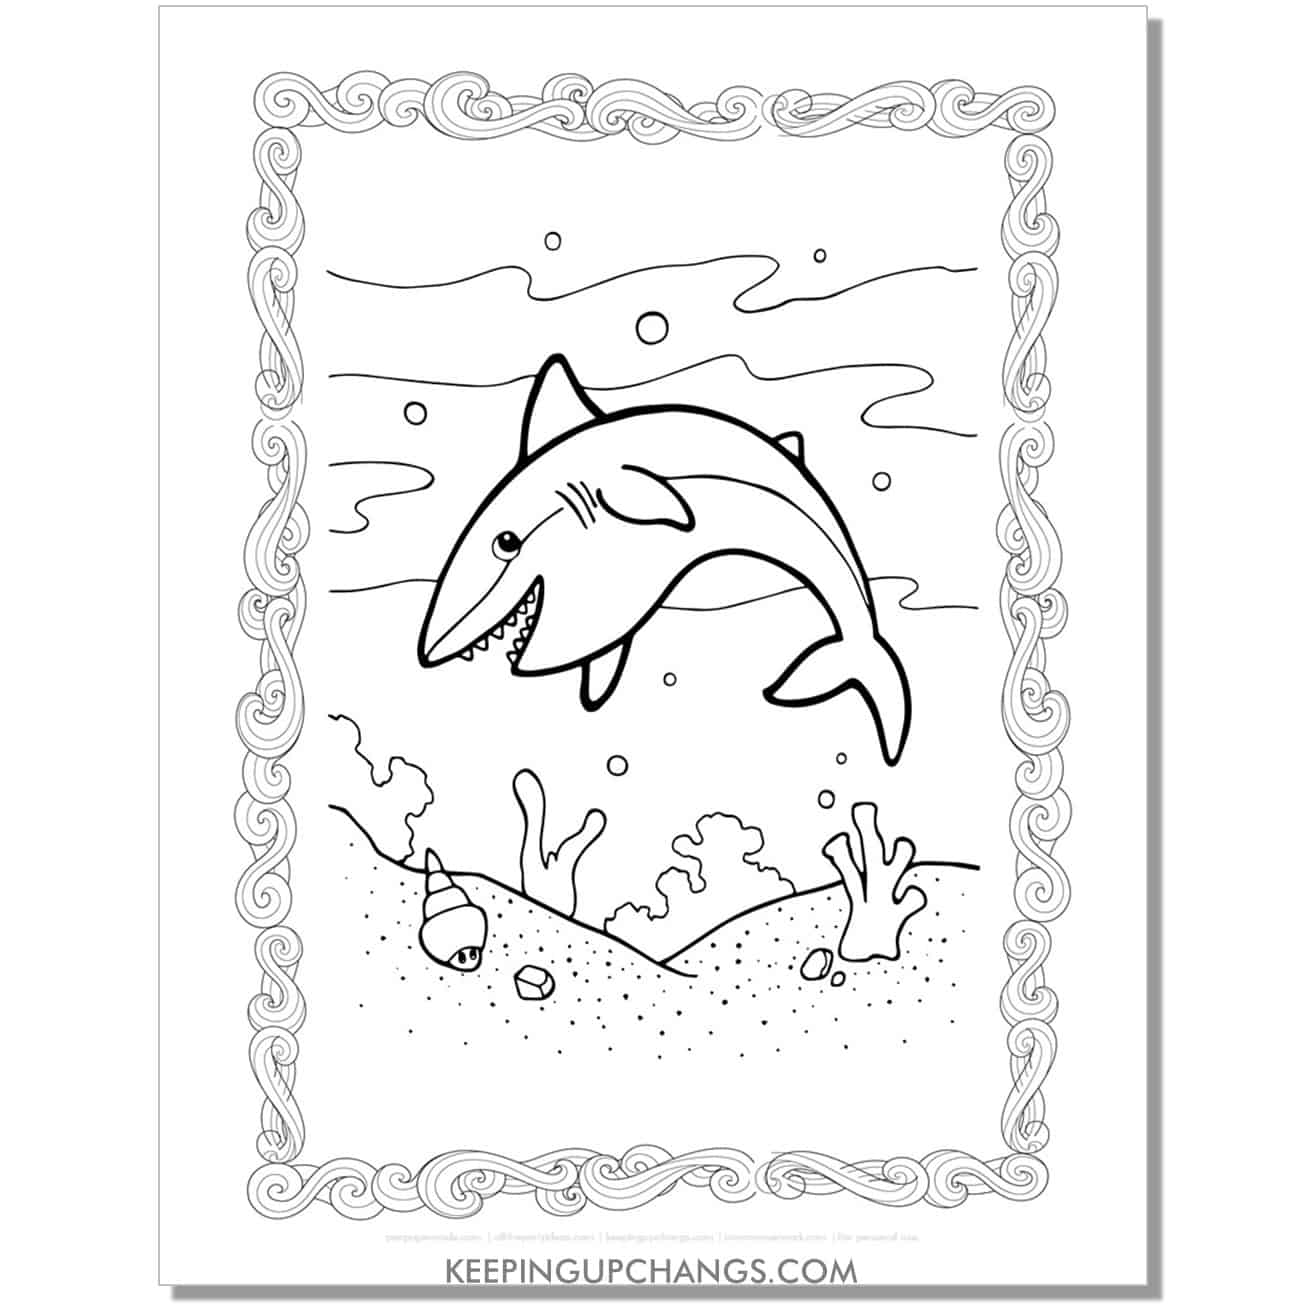 free happy shark in ocean coloring page, sheet.